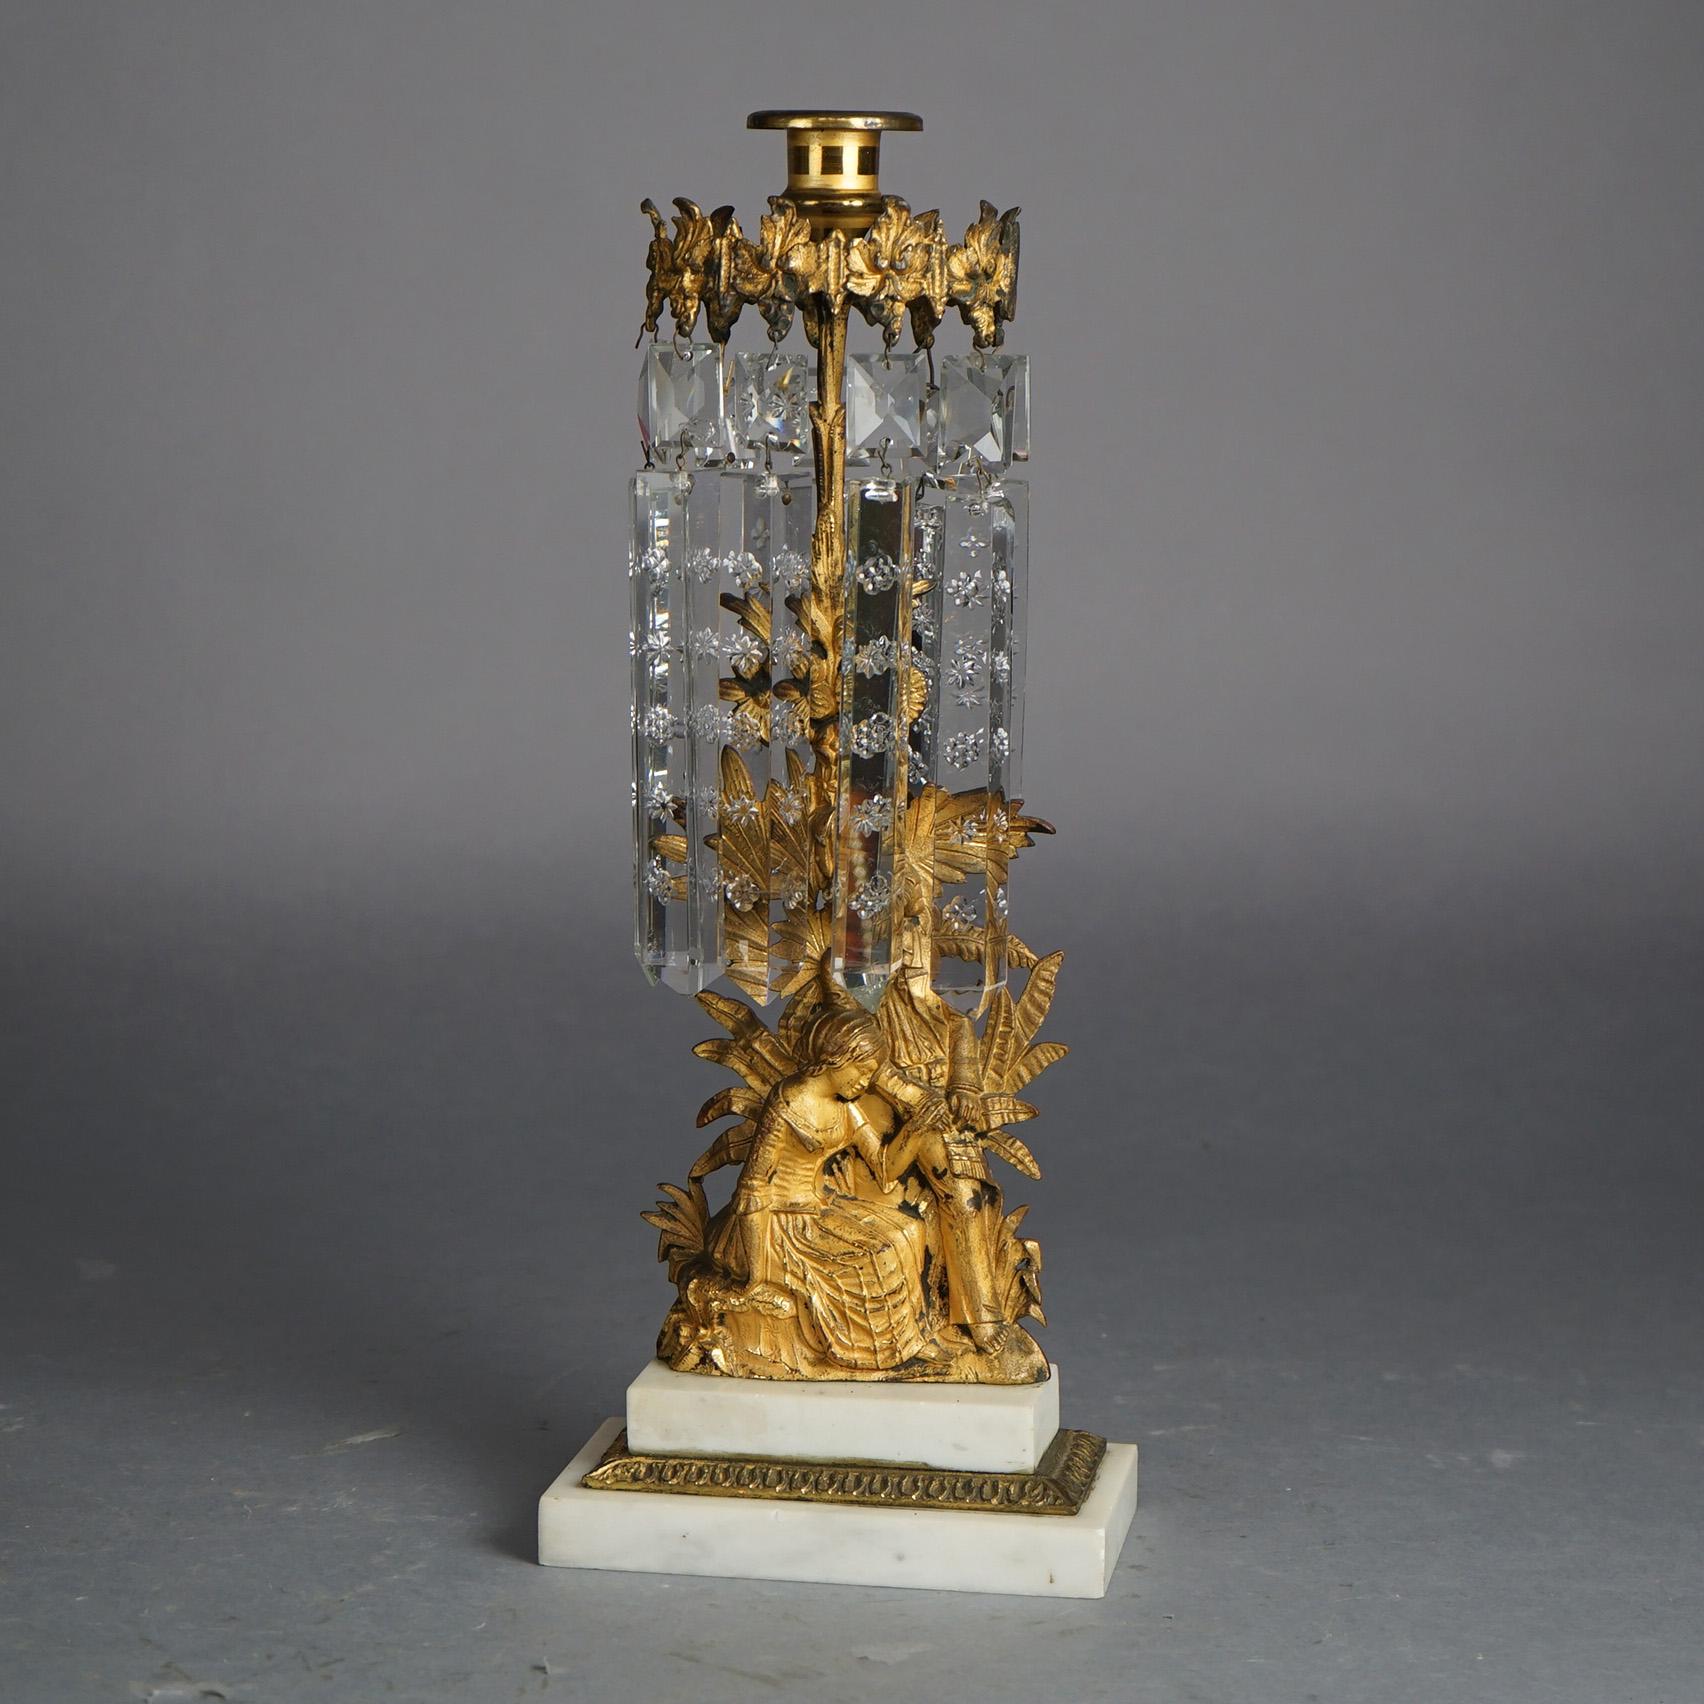 Antique Gilt Bronze American Girandole Candelabras with Marble & Crystals C1880 For Sale 3